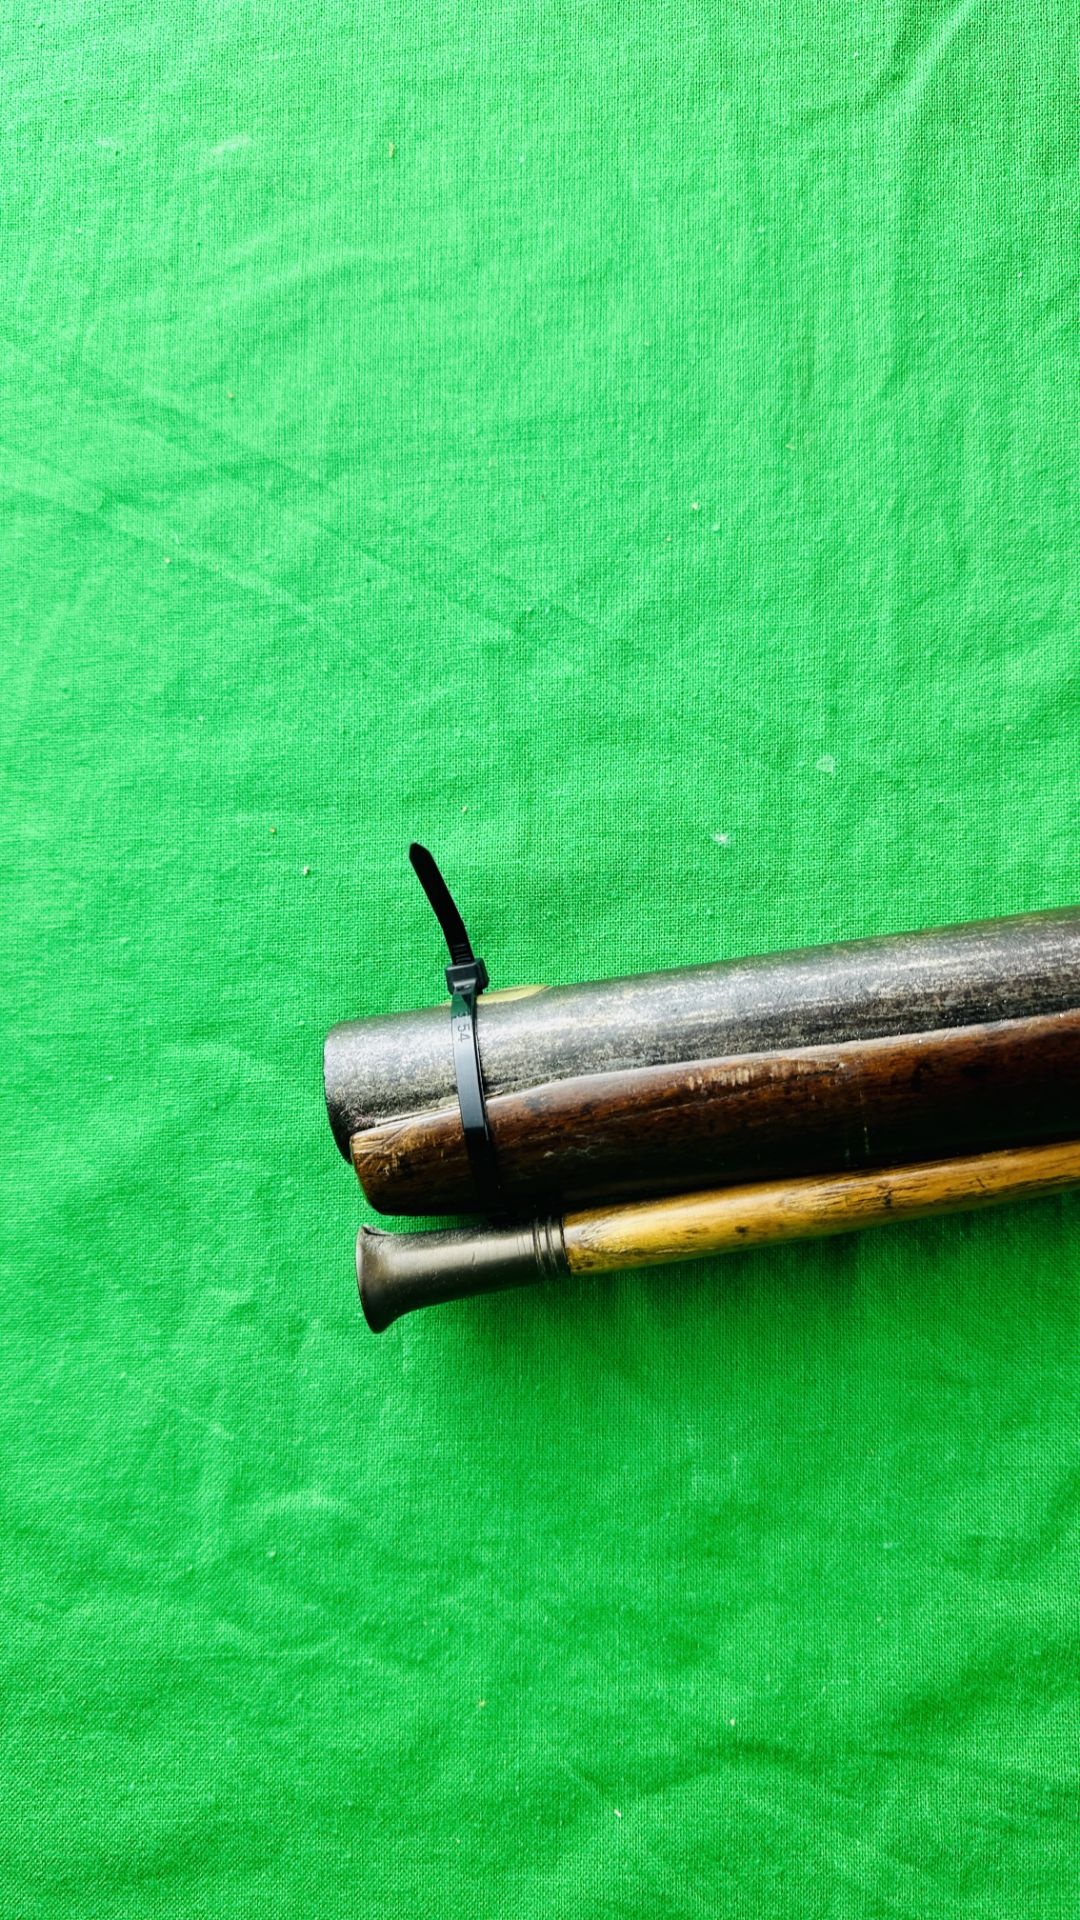 ANTIQUE PERCUSSION CAP MUZZLE LOADING SHOTGUN WITH LOADING ROD -COLLECTORS PIECE, - Image 16 of 18